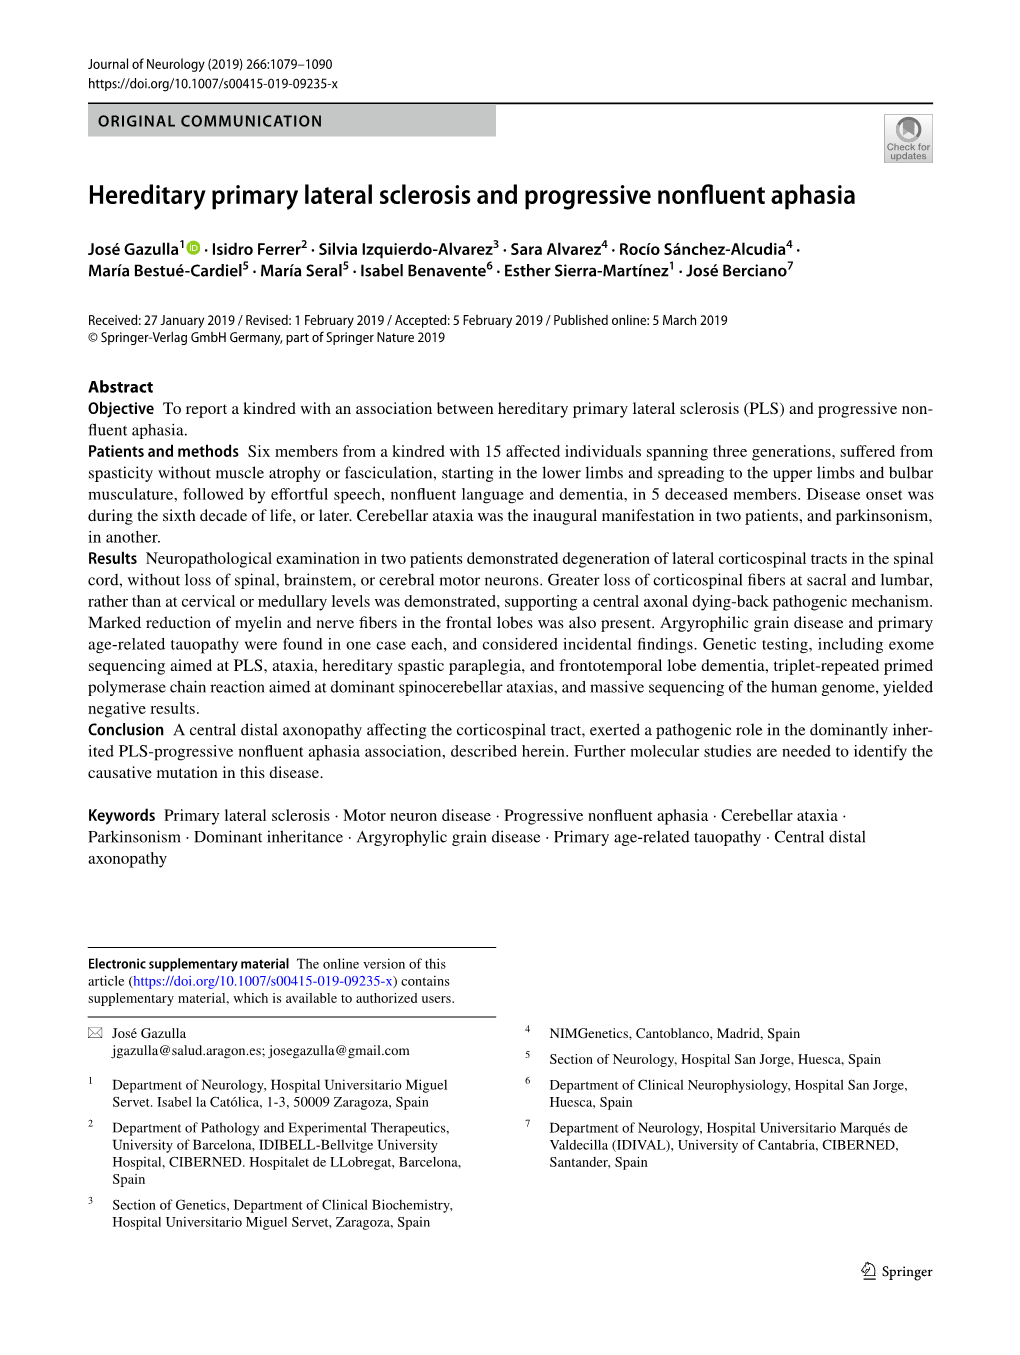 Hereditary Primary Lateral Sclerosis and Progressive Nonfluent Aphasia